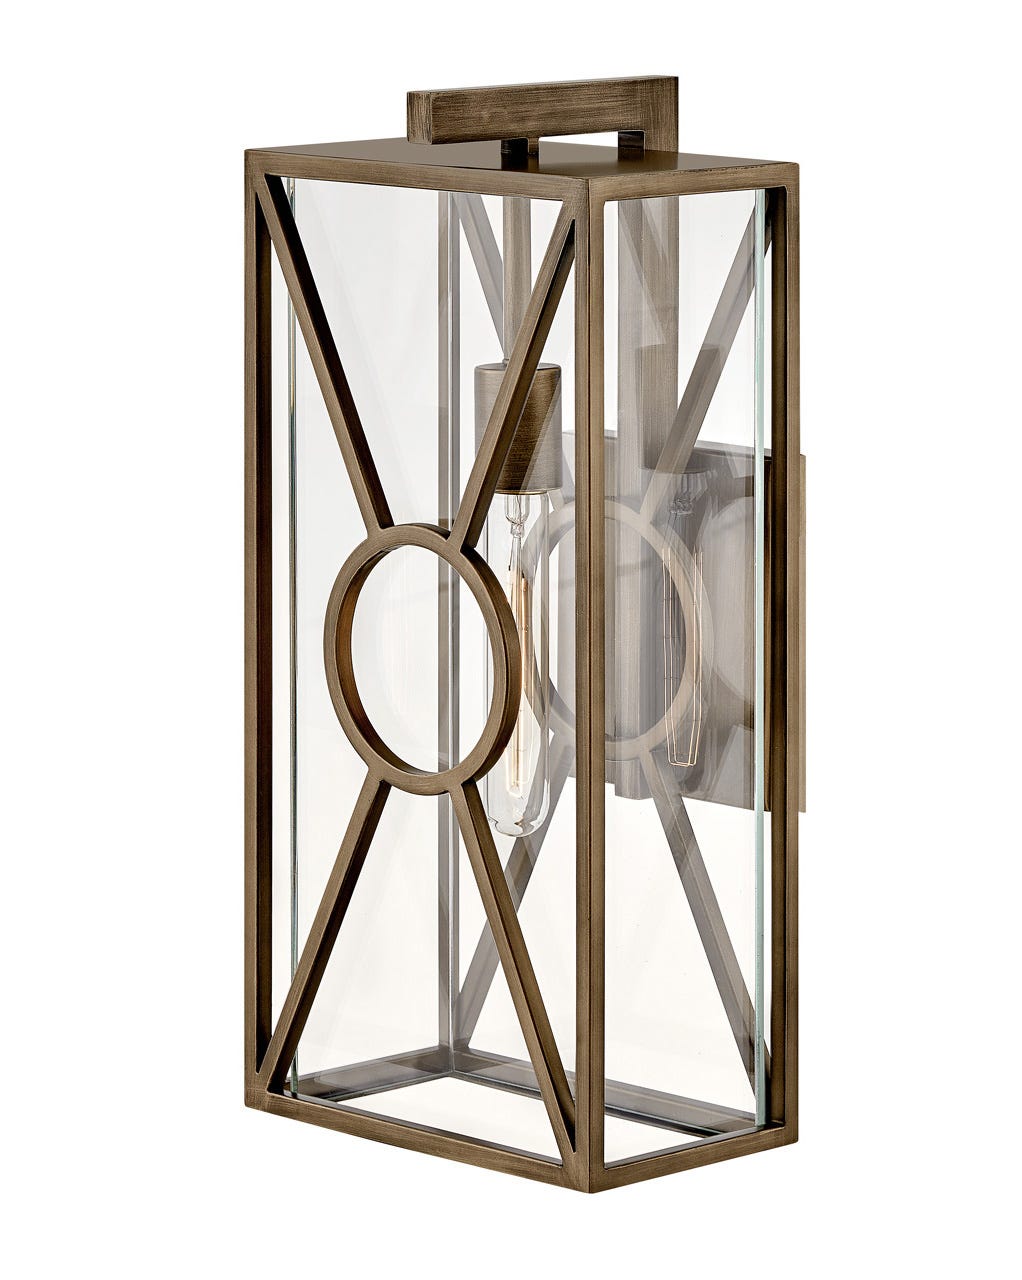 OUTDOOR BRIXTON Wall Mount Lantern Outdoor l Wall Hinkley Burnished Bronze 7.0x8.75x18.75 